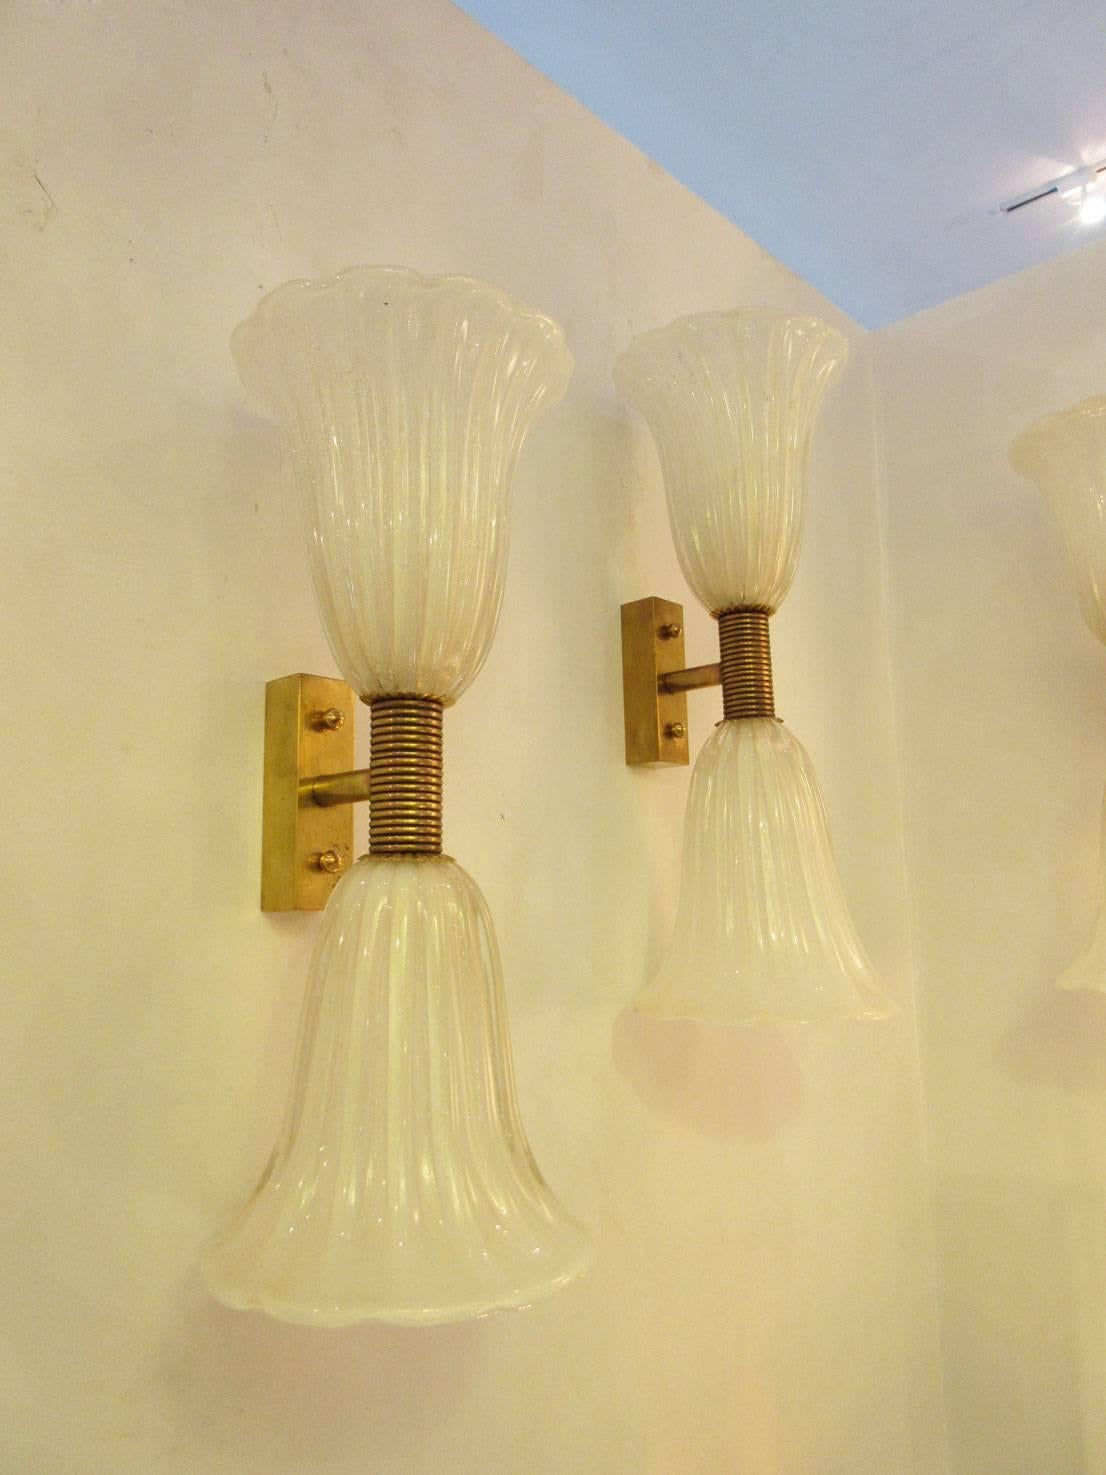 Pair of white Murano glass sconces with gold inclusions in a 'trumpet' style. Each end features a candelabra socket. The center detail is banded brass. Two pair available. They have been professionally rewired to US standards.